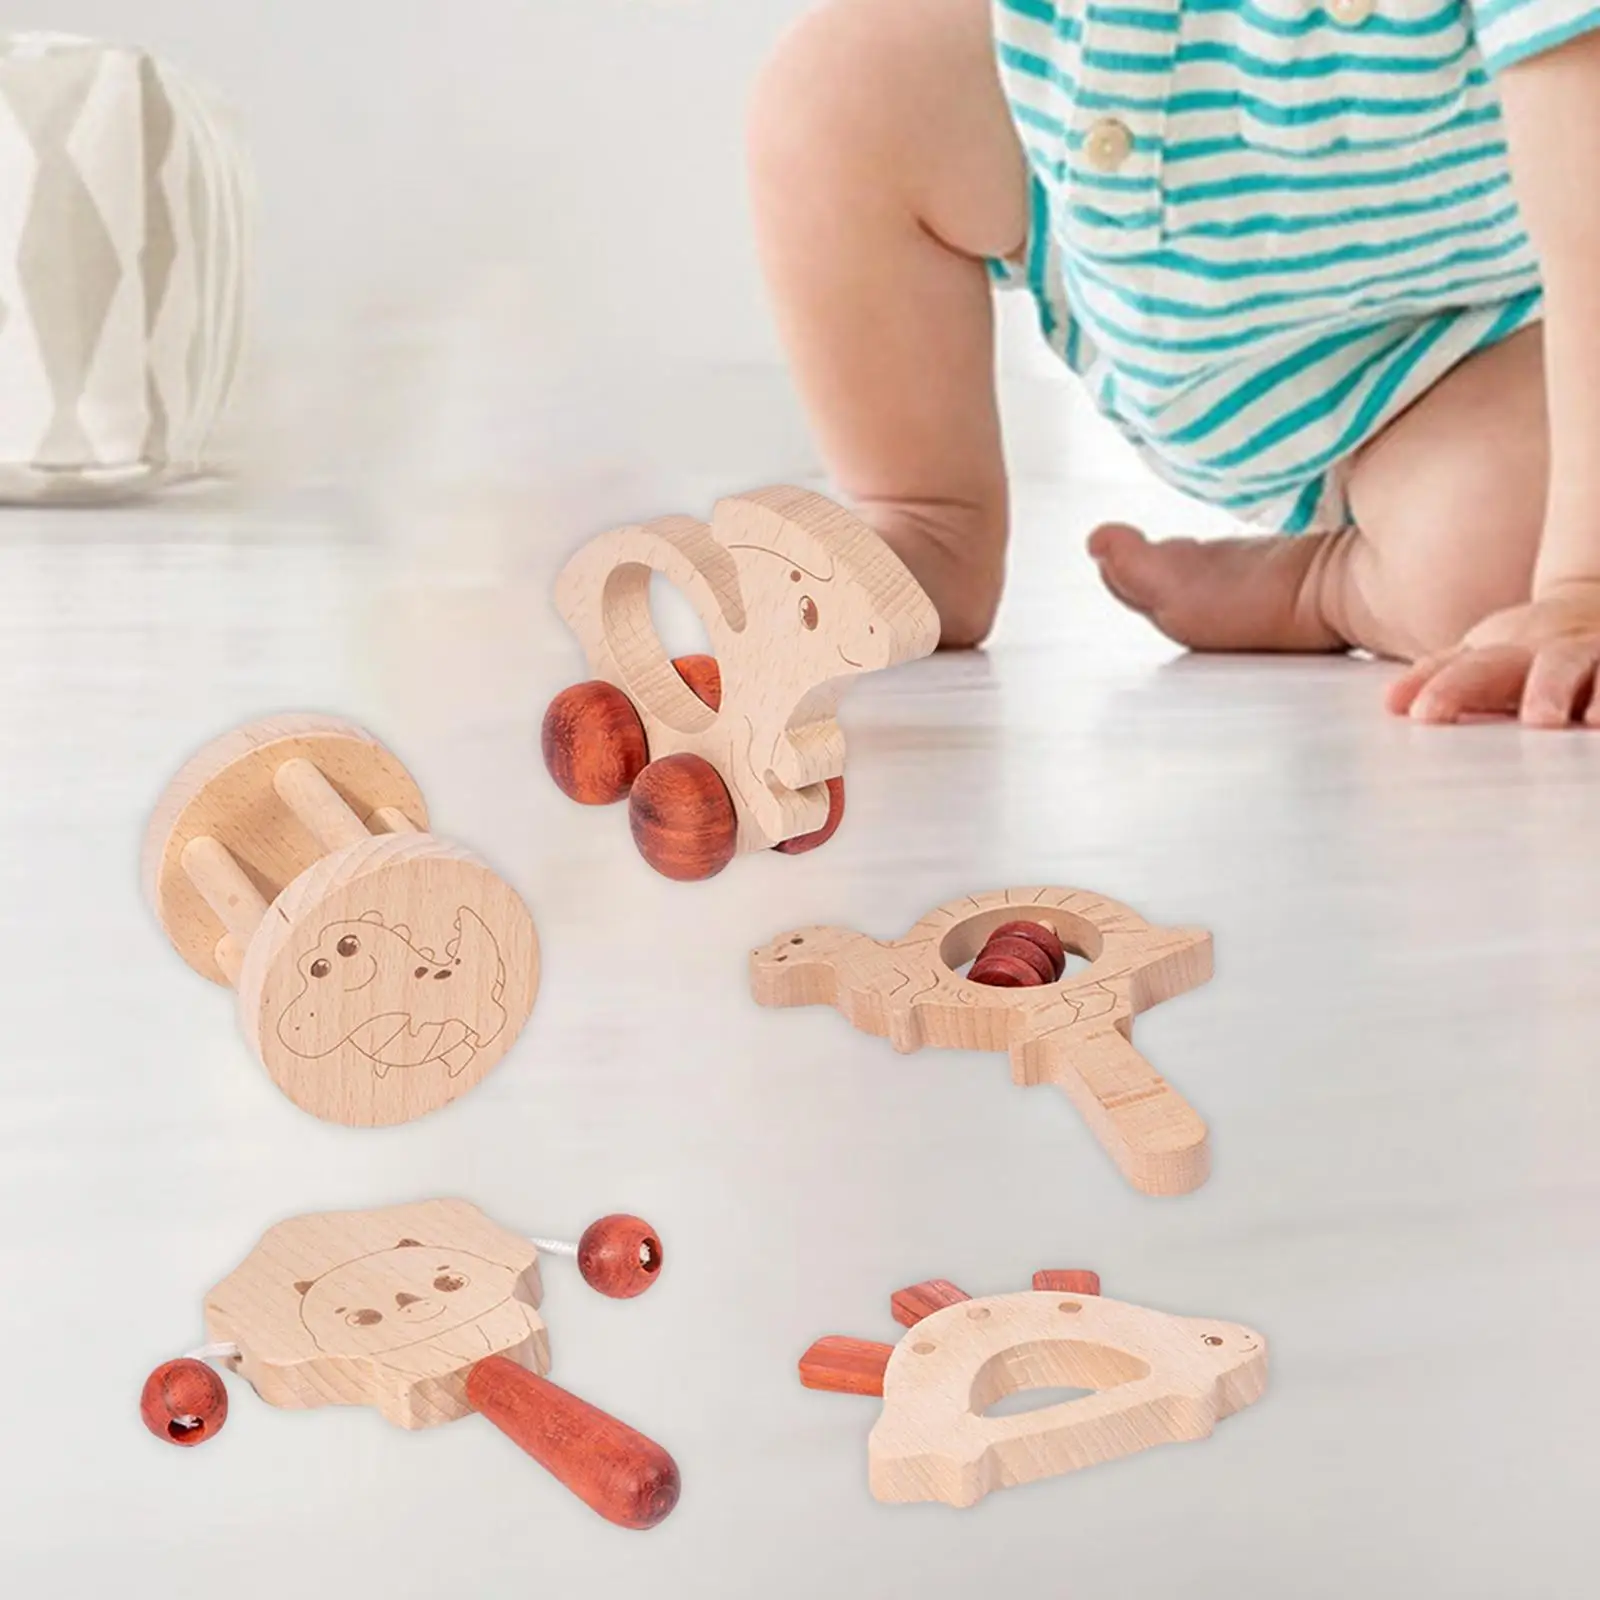 5x Wooden Baby Toy Set Montessori Toys Car Handmade Sensory Development Baby Rattle Wood Toy Rattles for Babies 6-12 Months